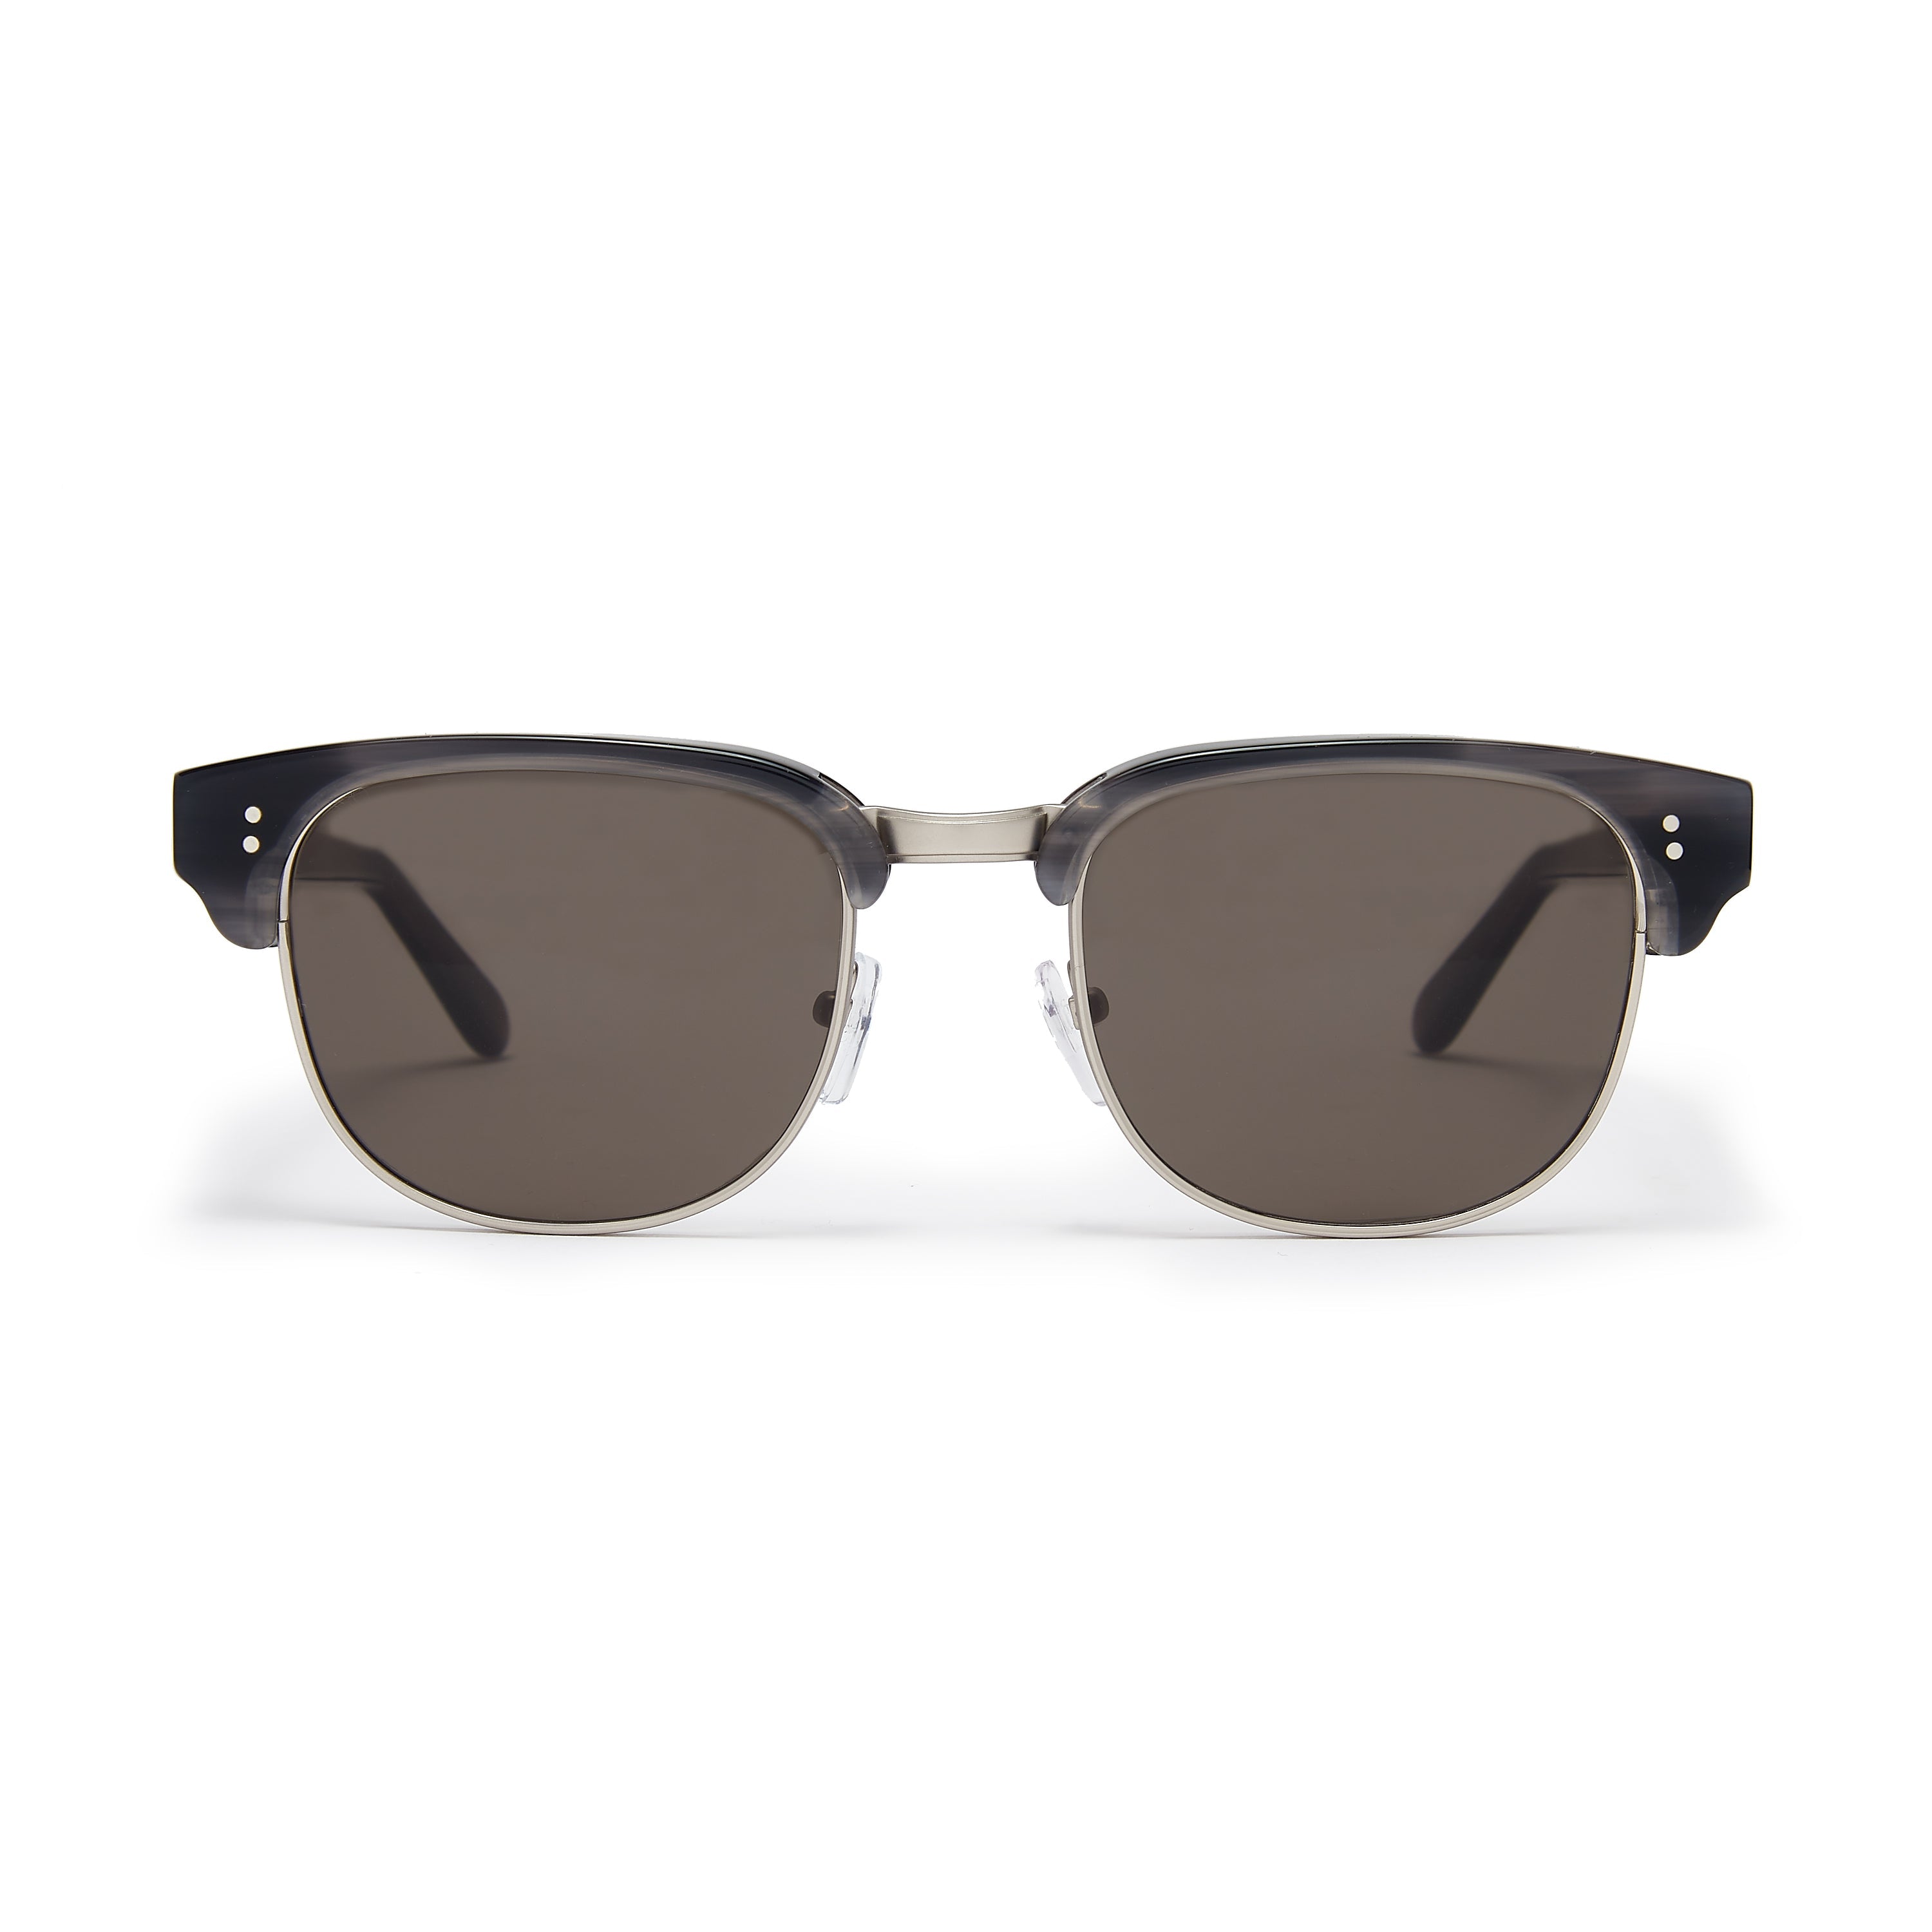 SULWE Horn Sunglasses by Pala